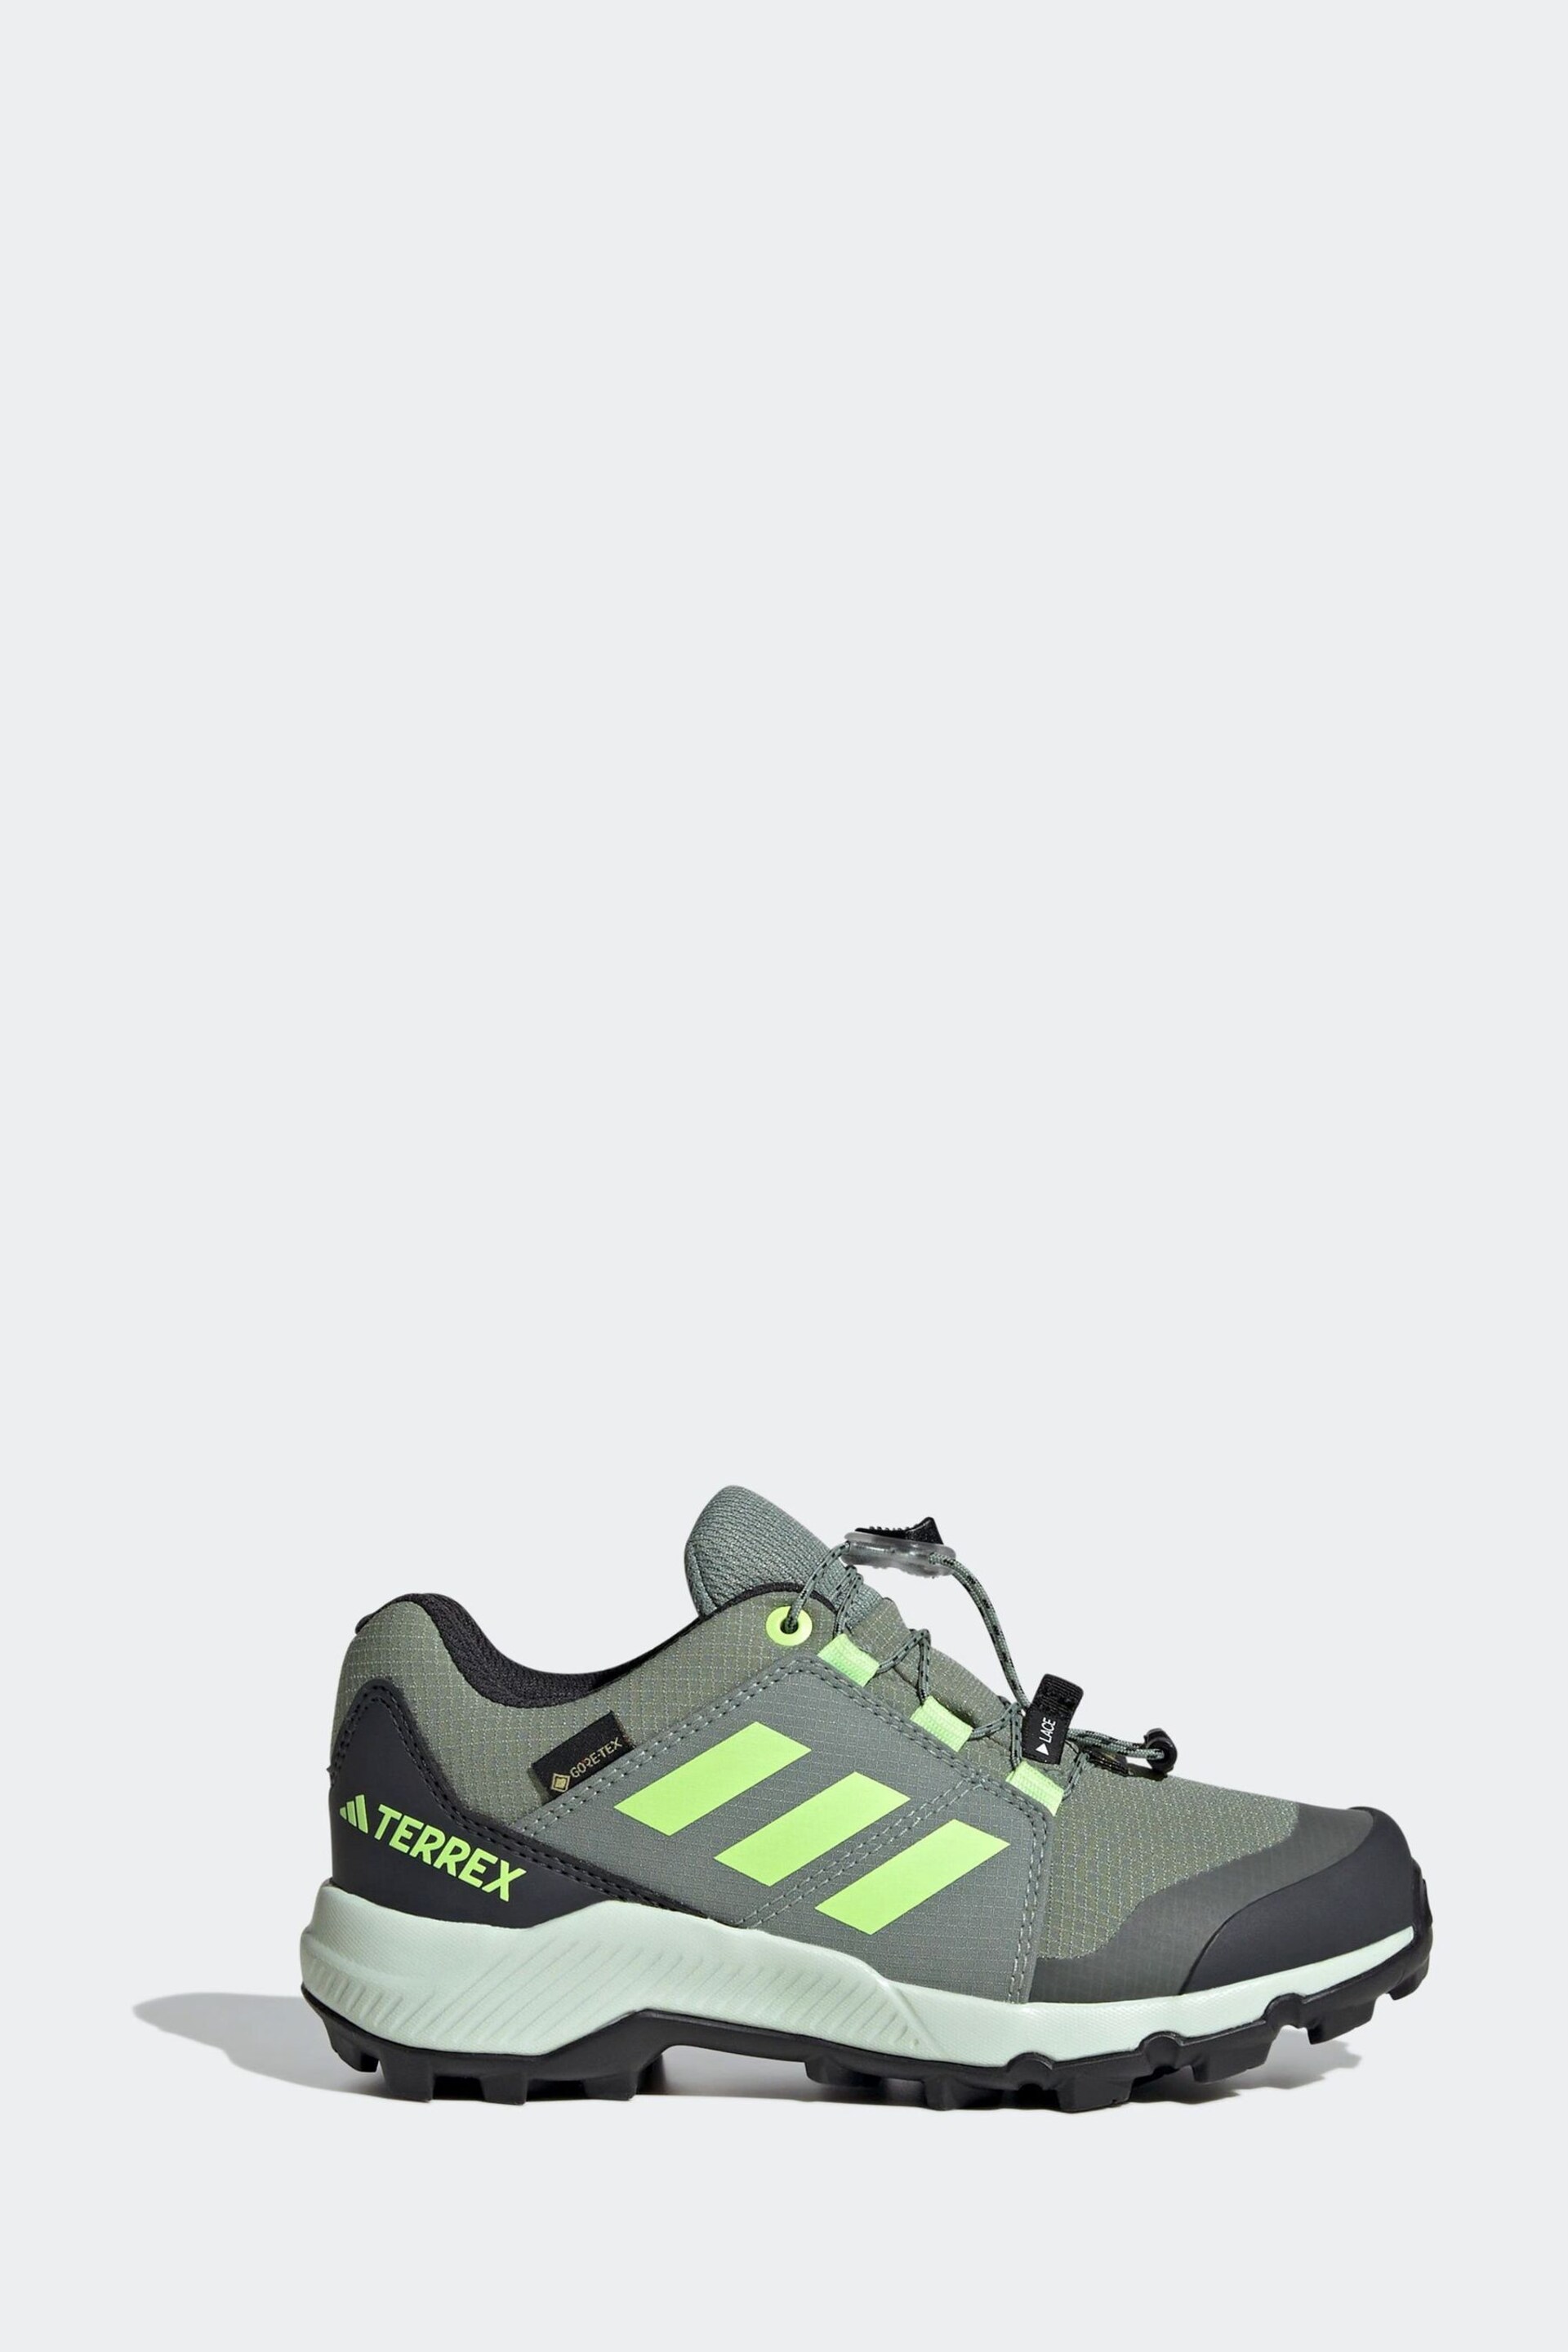 adidas Terrex Gore Tex Hiking Trainers - Image 1 of 17